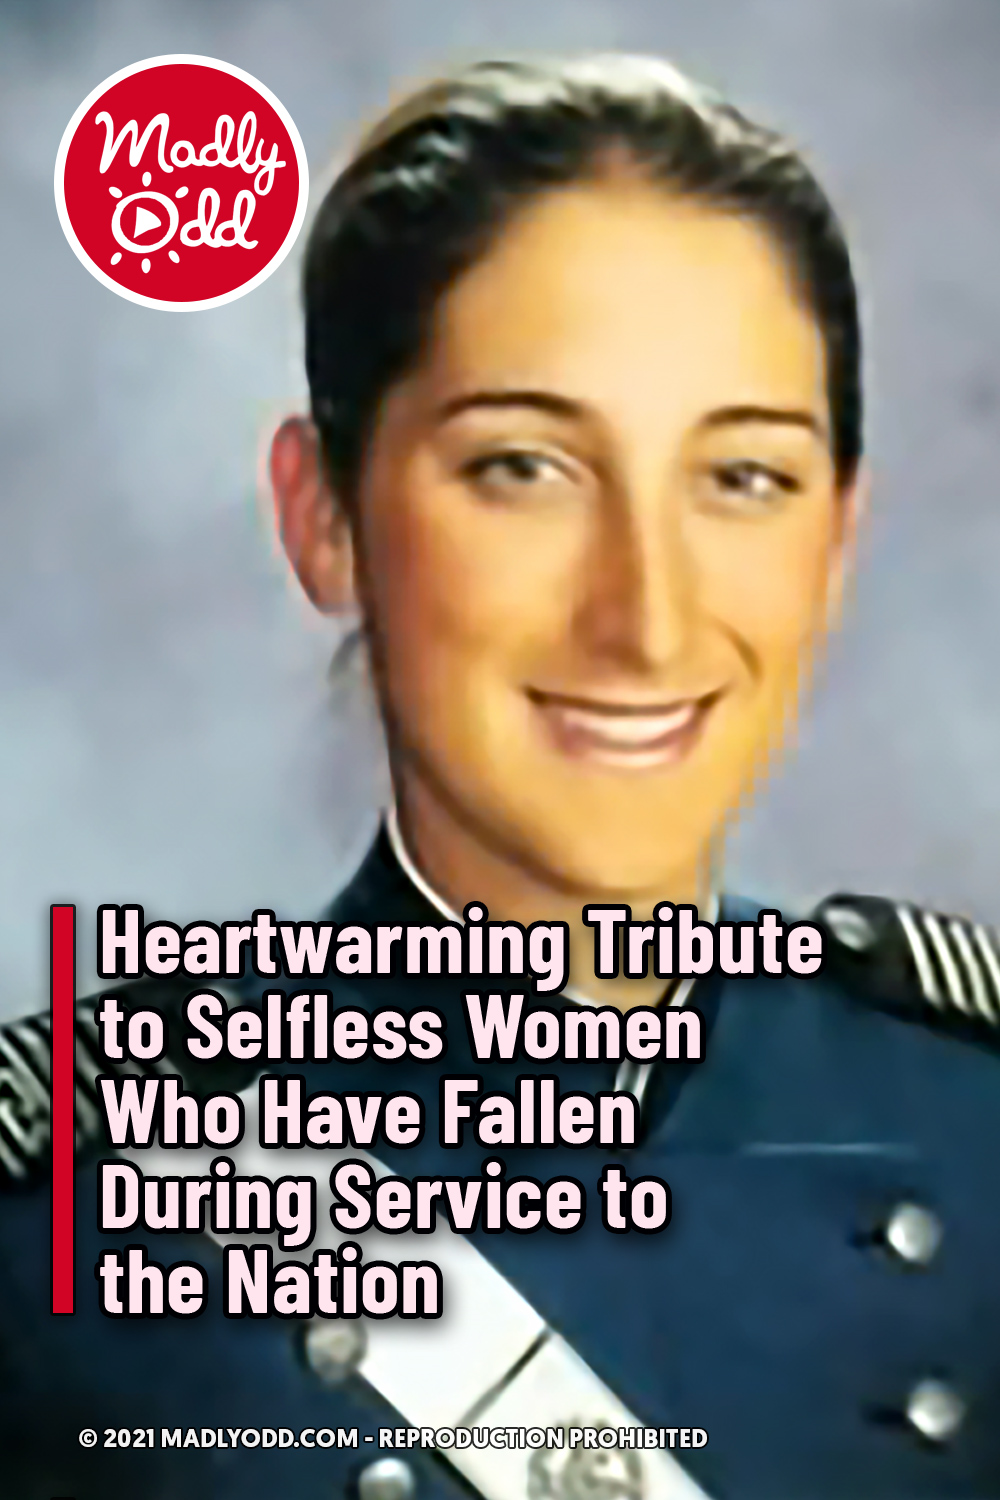 Heartwarming Tribute to Selfless Women Who Have Fallen During Service to the Nation